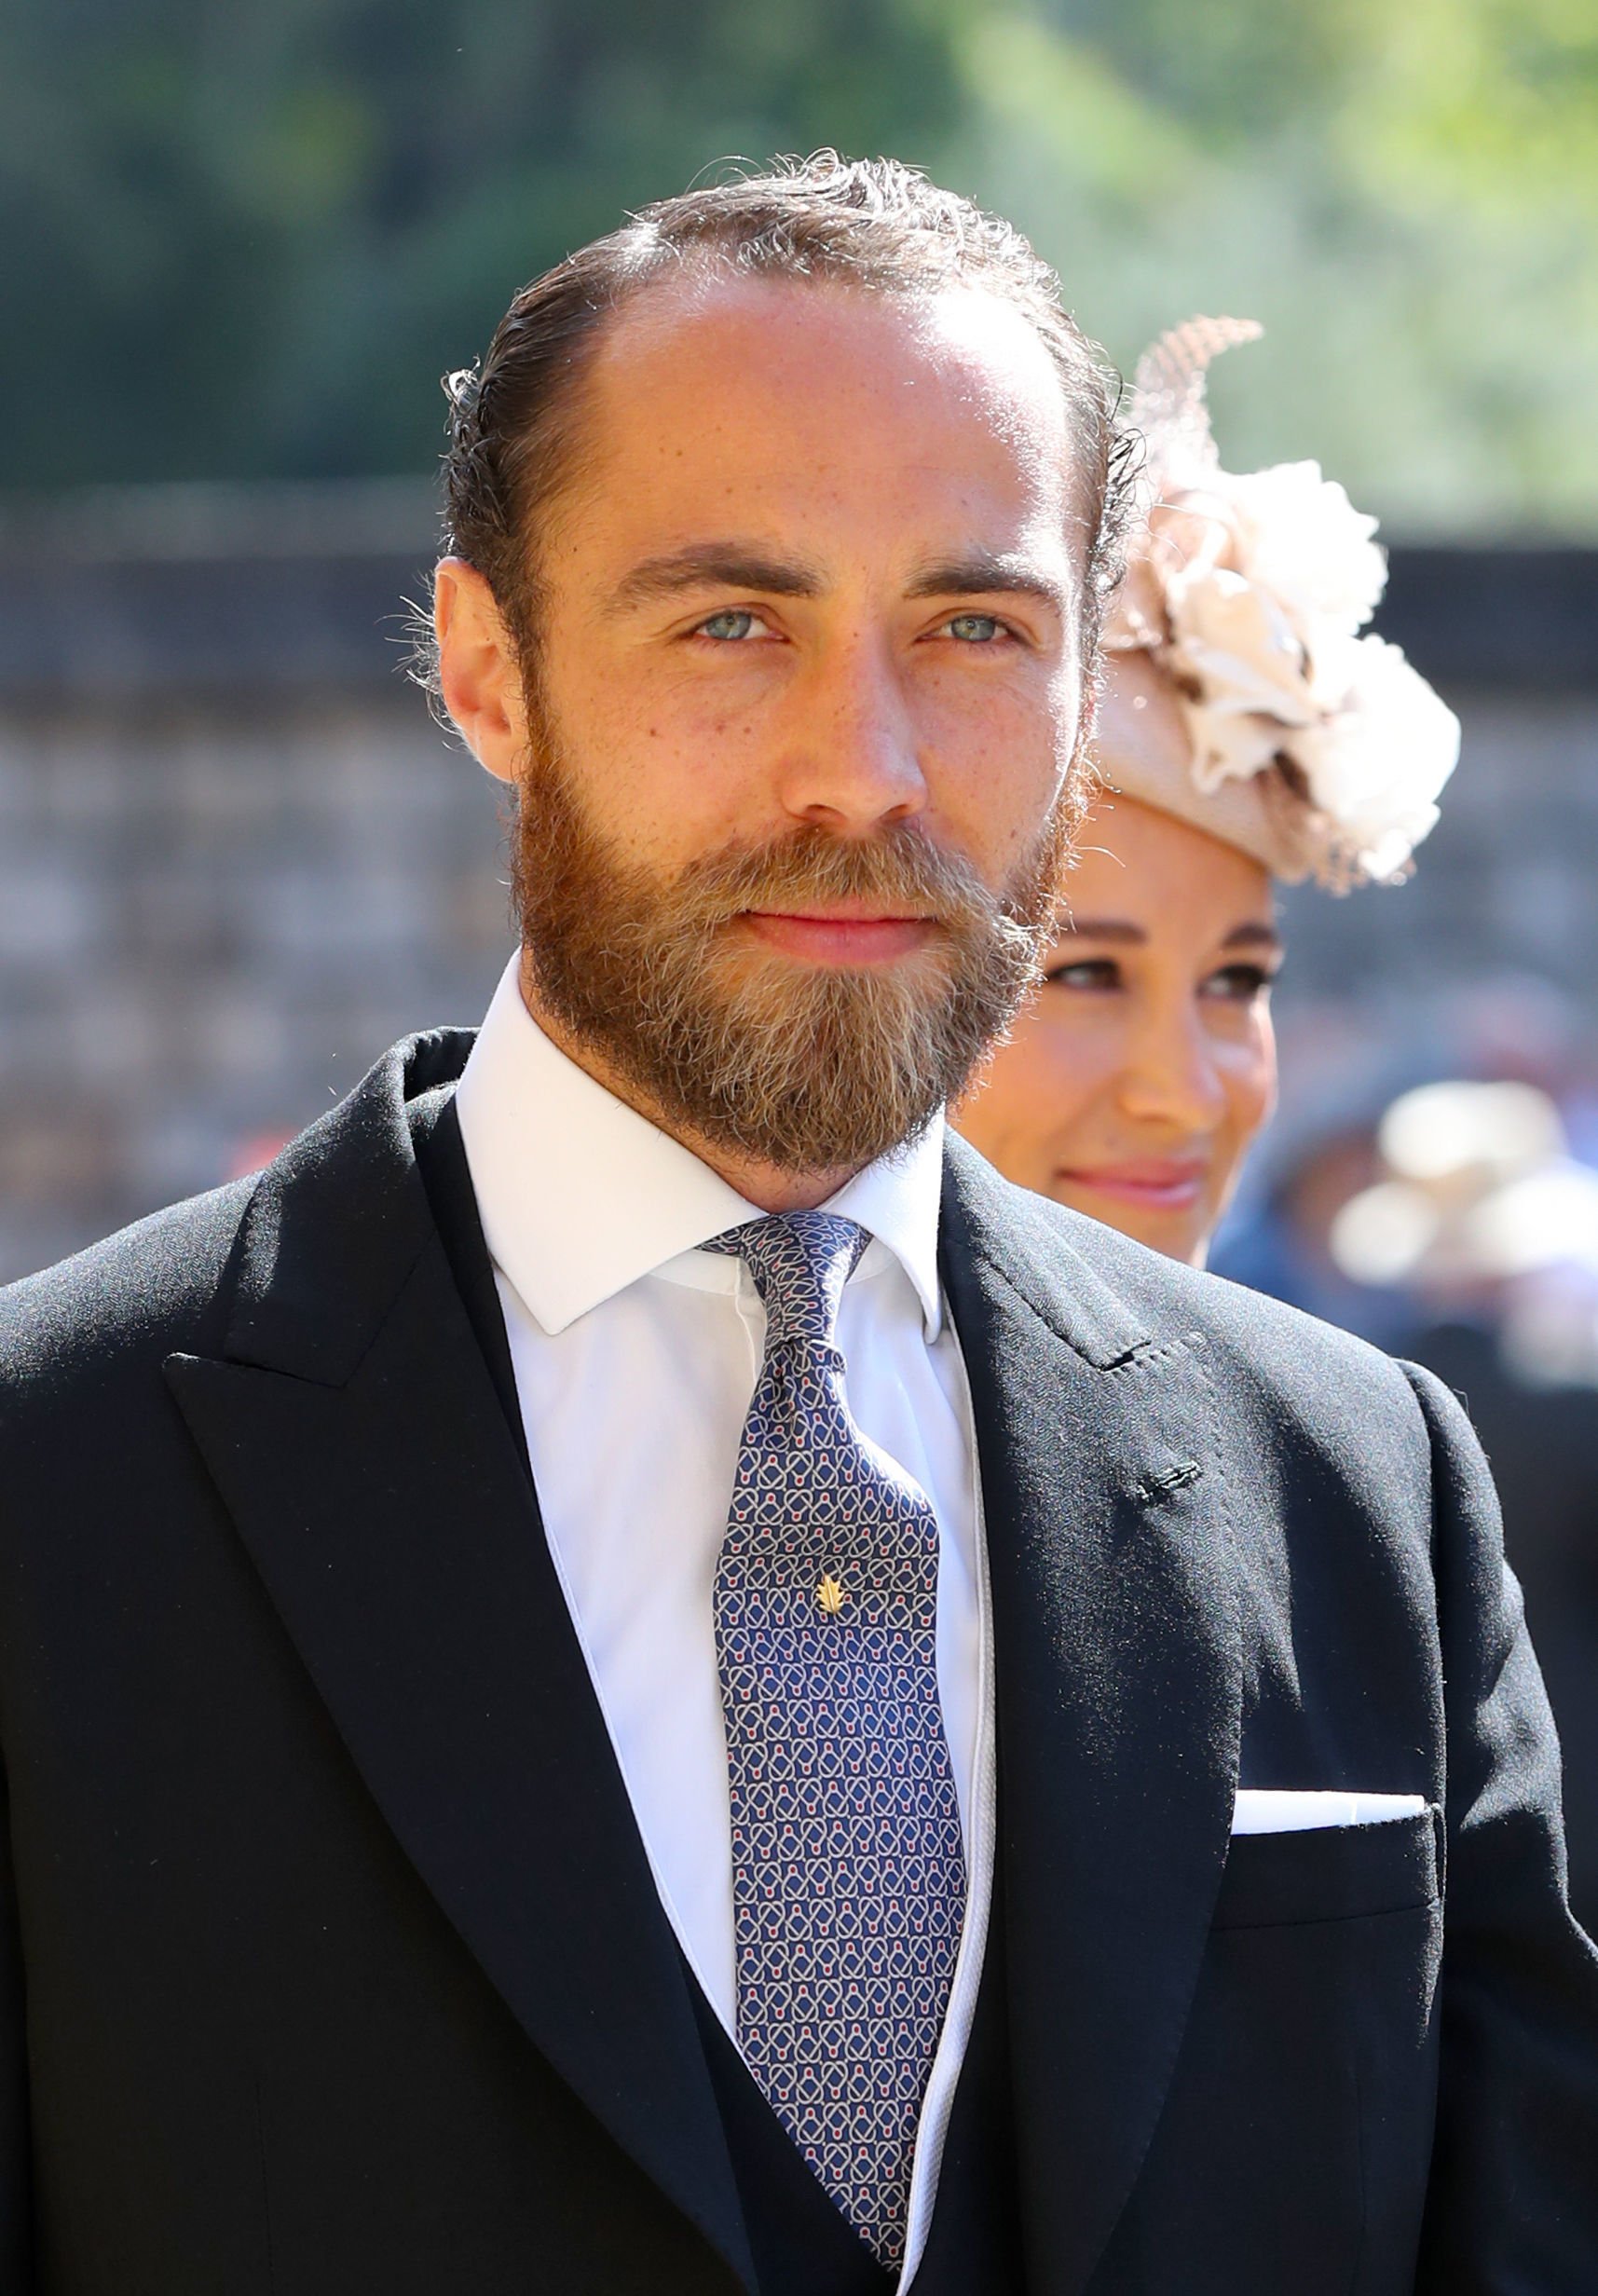 James Middleton arrives at St George's Chapel at Windsor Castle before the wedding of Prince Harry to Meghan Markle on May 19, 2018 in Windsor, England | Source: Getty Images